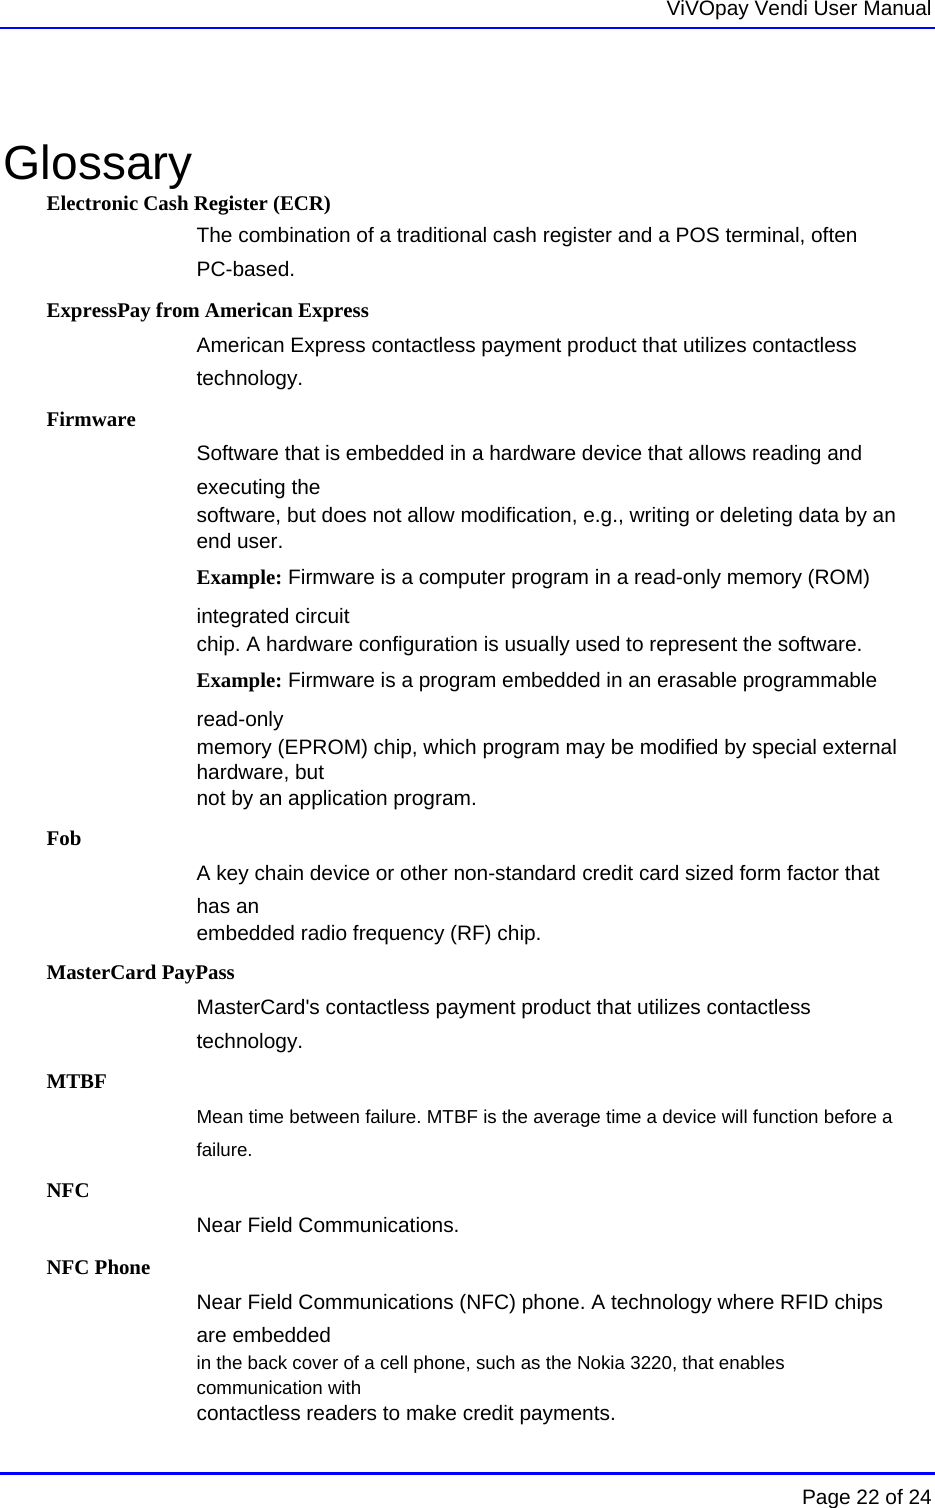   ViVOpay Vendi User Manual        Page 22 of 24     Glossary Electronic Cash Register (ECR) The combination of a traditional cash register and a POS terminal, often PC-based. ExpressPay from American Express American Express contactless payment product that utilizes contactless technology.  Firmware Software that is embedded in a hardware device that allows reading and executing the software, but does not allow modification, e.g., writing or deleting data by an end user. Example: Firmware is a computer program in a read-only memory (ROM) integrated circuit chip. A hardware configuration is usually used to represent the software. Example: Firmware is a program embedded in an erasable programmable read-only memory (EPROM) chip, which program may be modified by special external hardware, but not by an application program.  Fob A key chain device or other non-standard credit card sized form factor that has an embedded radio frequency (RF) chip. MasterCard PayPass MasterCard&apos;s contactless payment product that utilizes contactless technology. MTBF Mean time between failure. MTBF is the average time a device will function before a failure. NFC Near Field Communications. NFC Phone Near Field Communications (NFC) phone. A technology where RFID chips are embedded in the back cover of a cell phone, such as the Nokia 3220, that enables communication with contactless readers to make credit payments. 